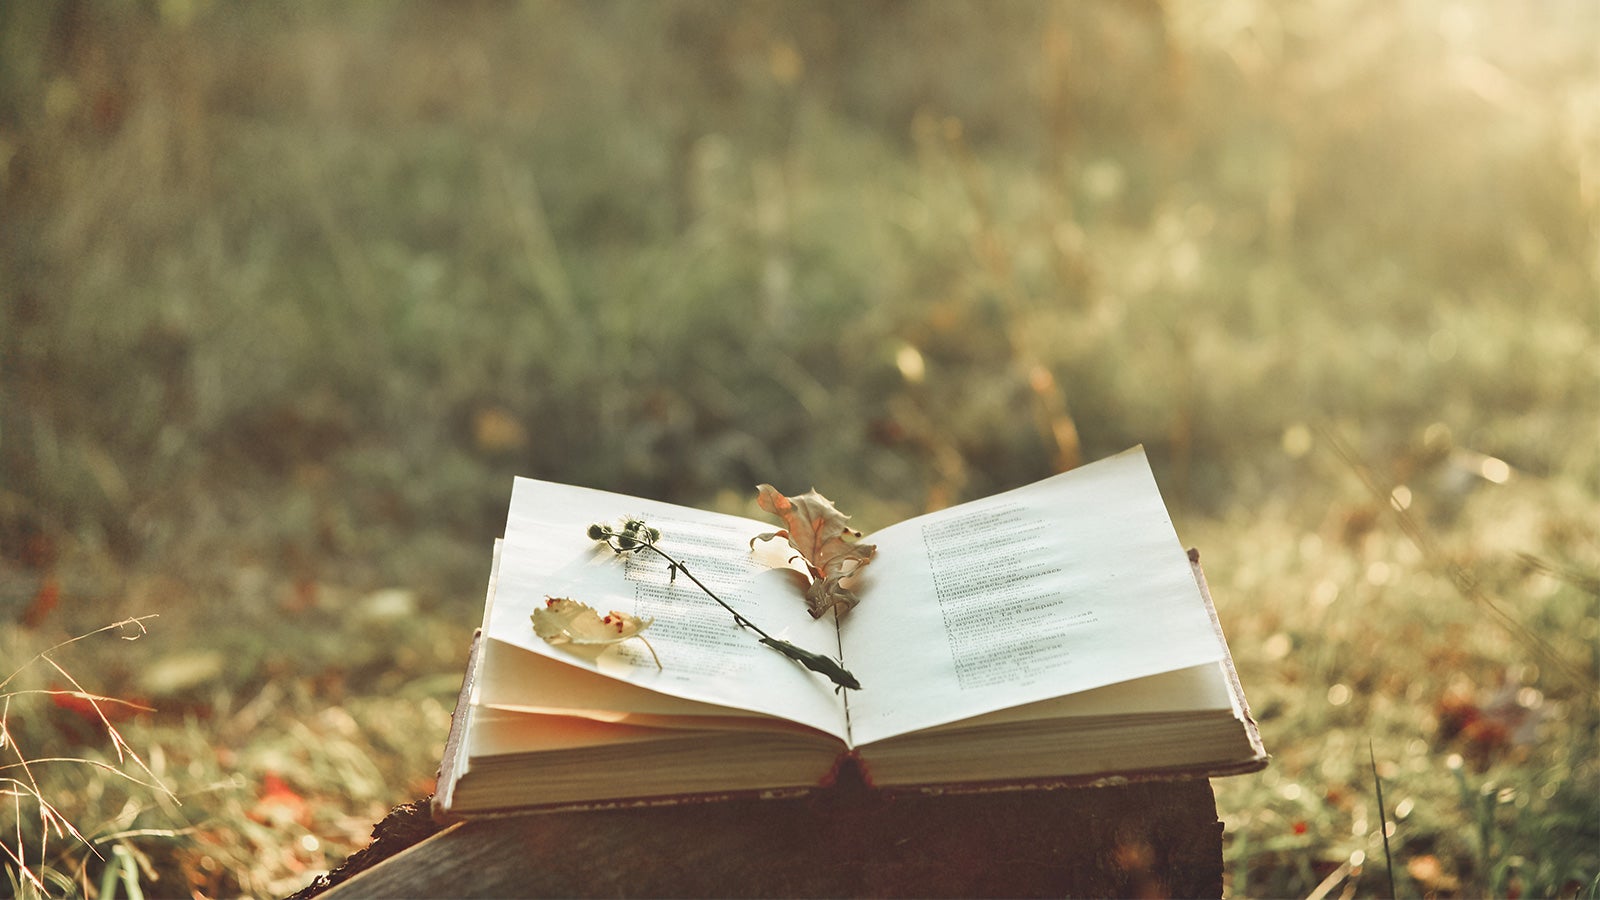 A book lies open in a field with a few flowers resting on its pages.